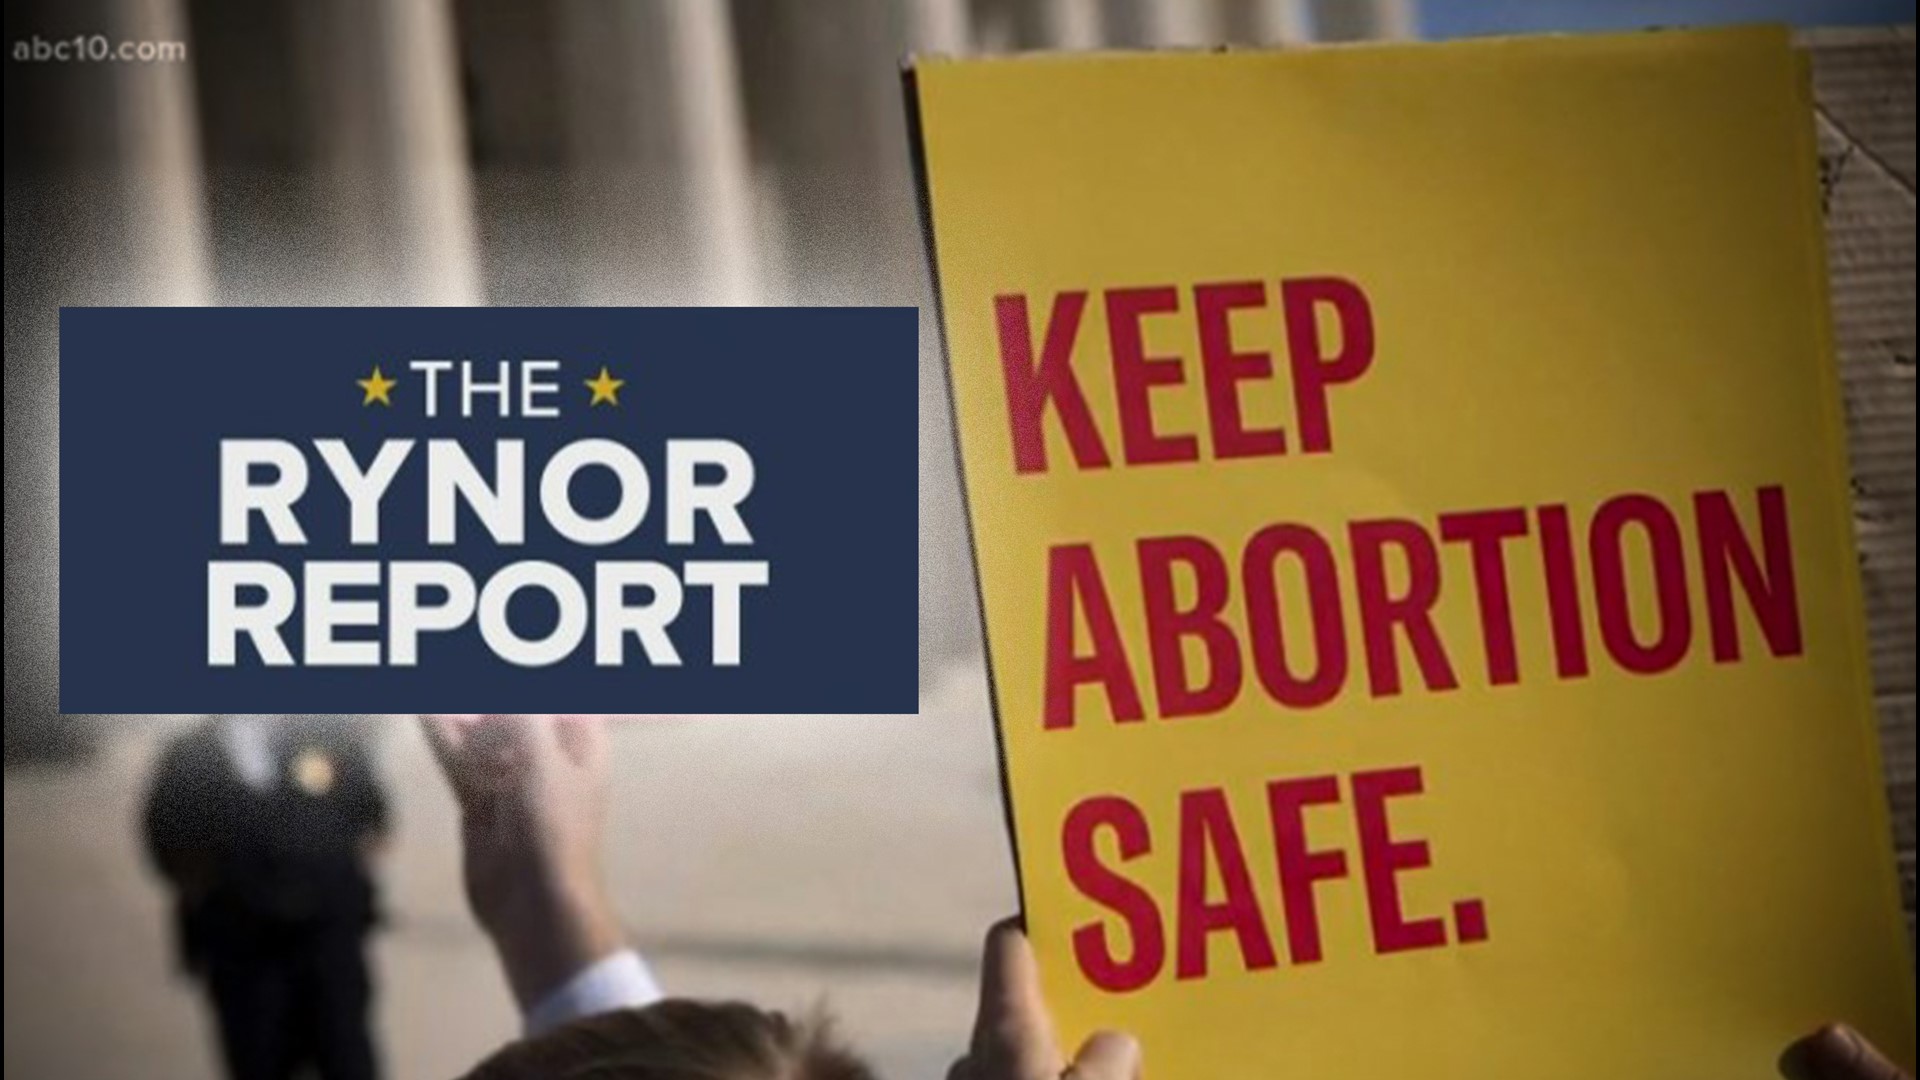 Our Morgan Rynor reports the California lawmakers are set on making the state a sanctuary for those seeking abortions and expanding local abortion rights.